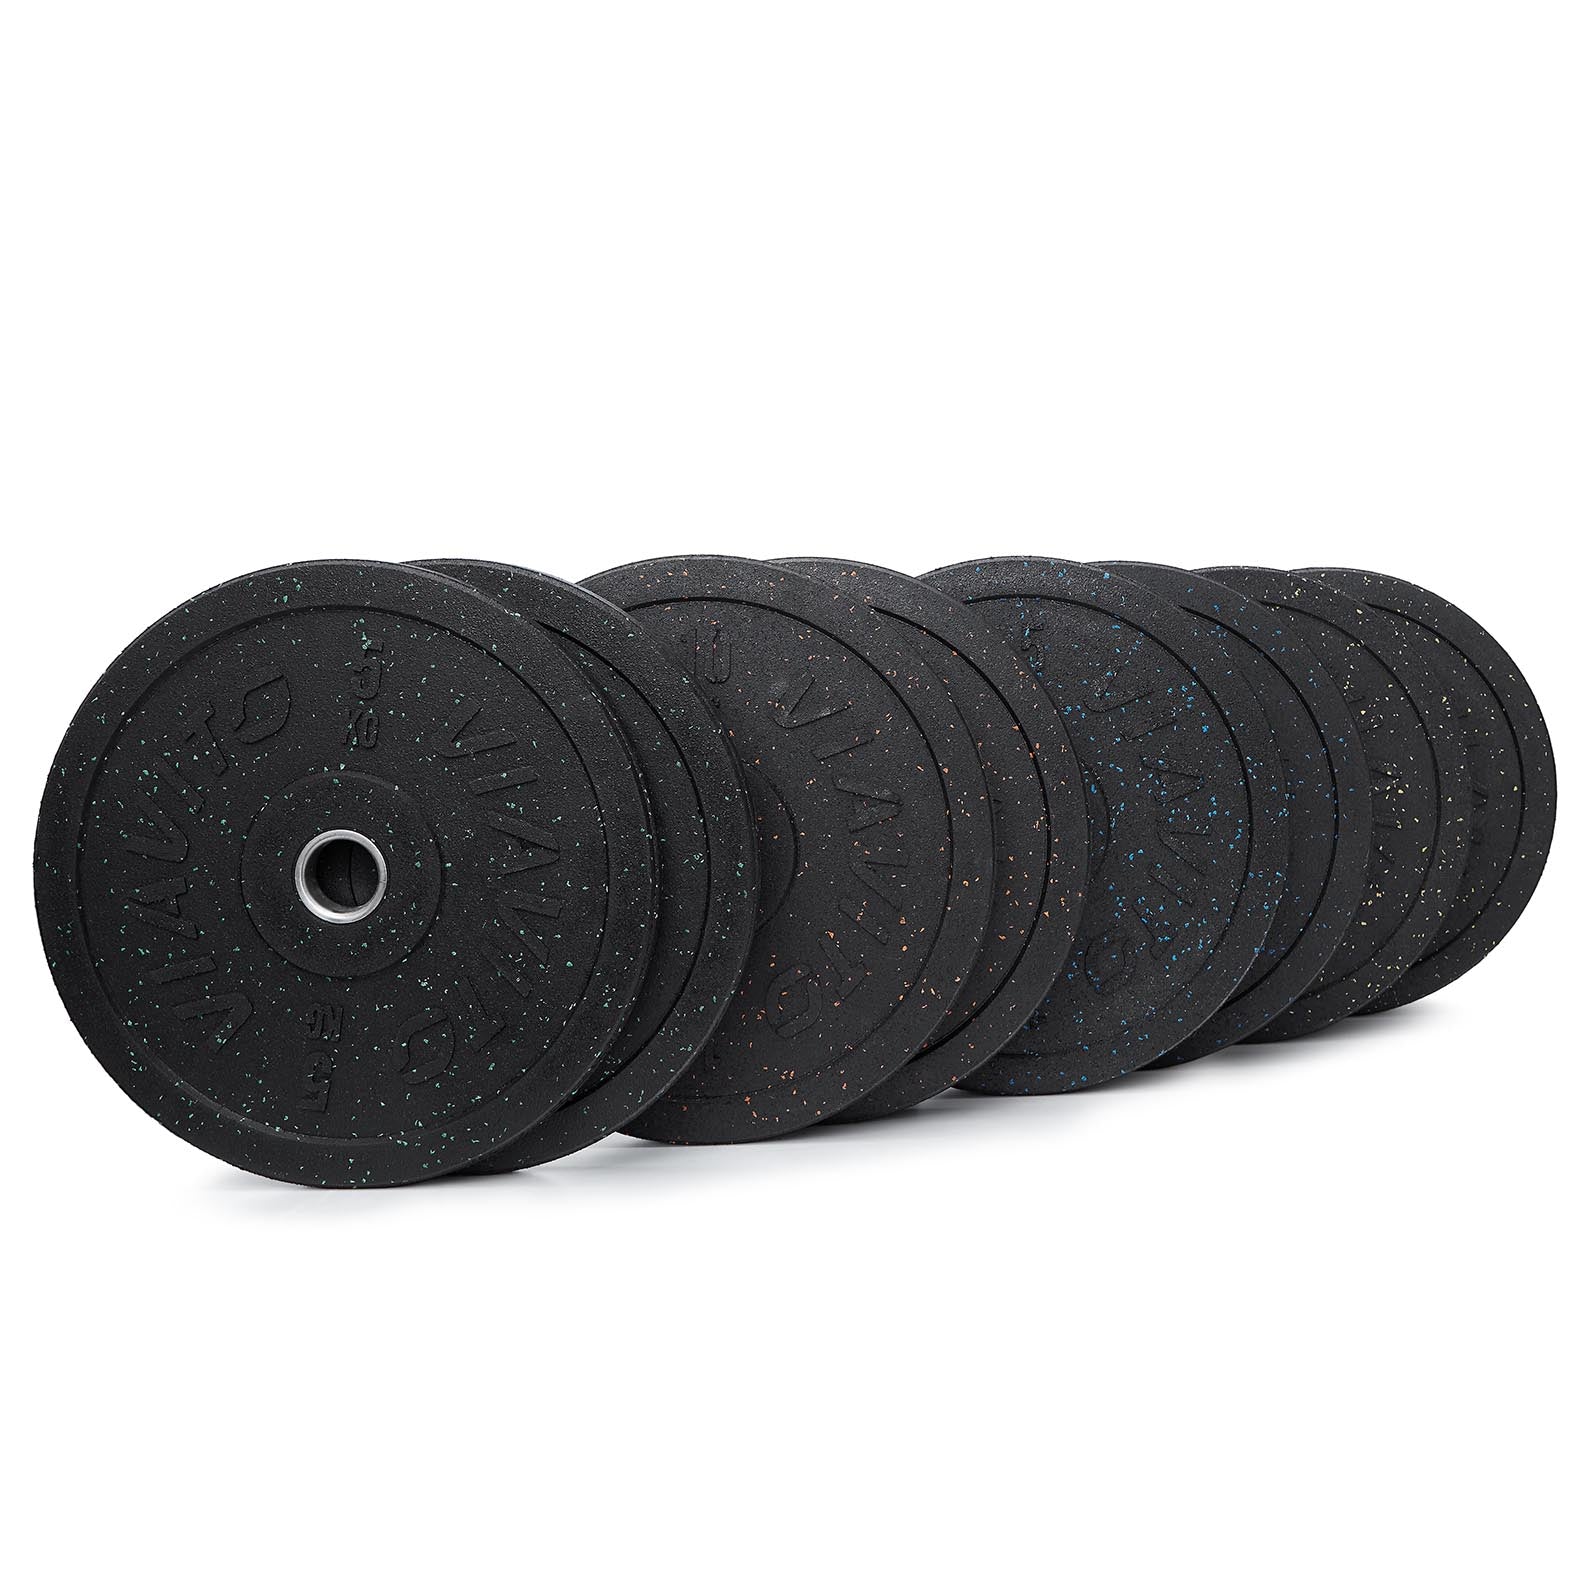 Viavito Rubber Crumb Bumper Olympic Weight Plates